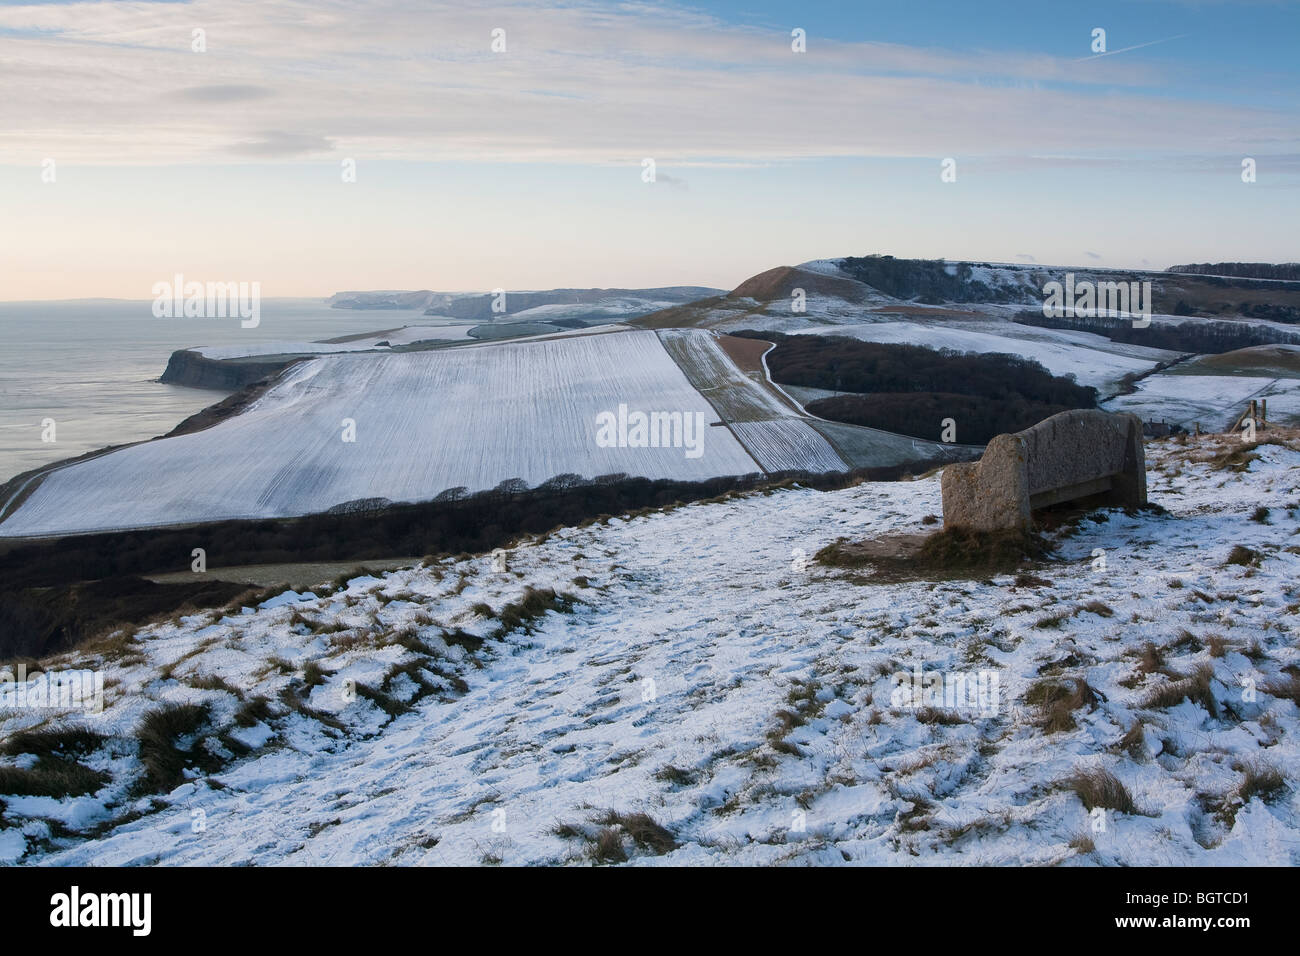 Snow-covered view of the Jurassic Coast from Houns-tout, Dorset, UK Stock Photo